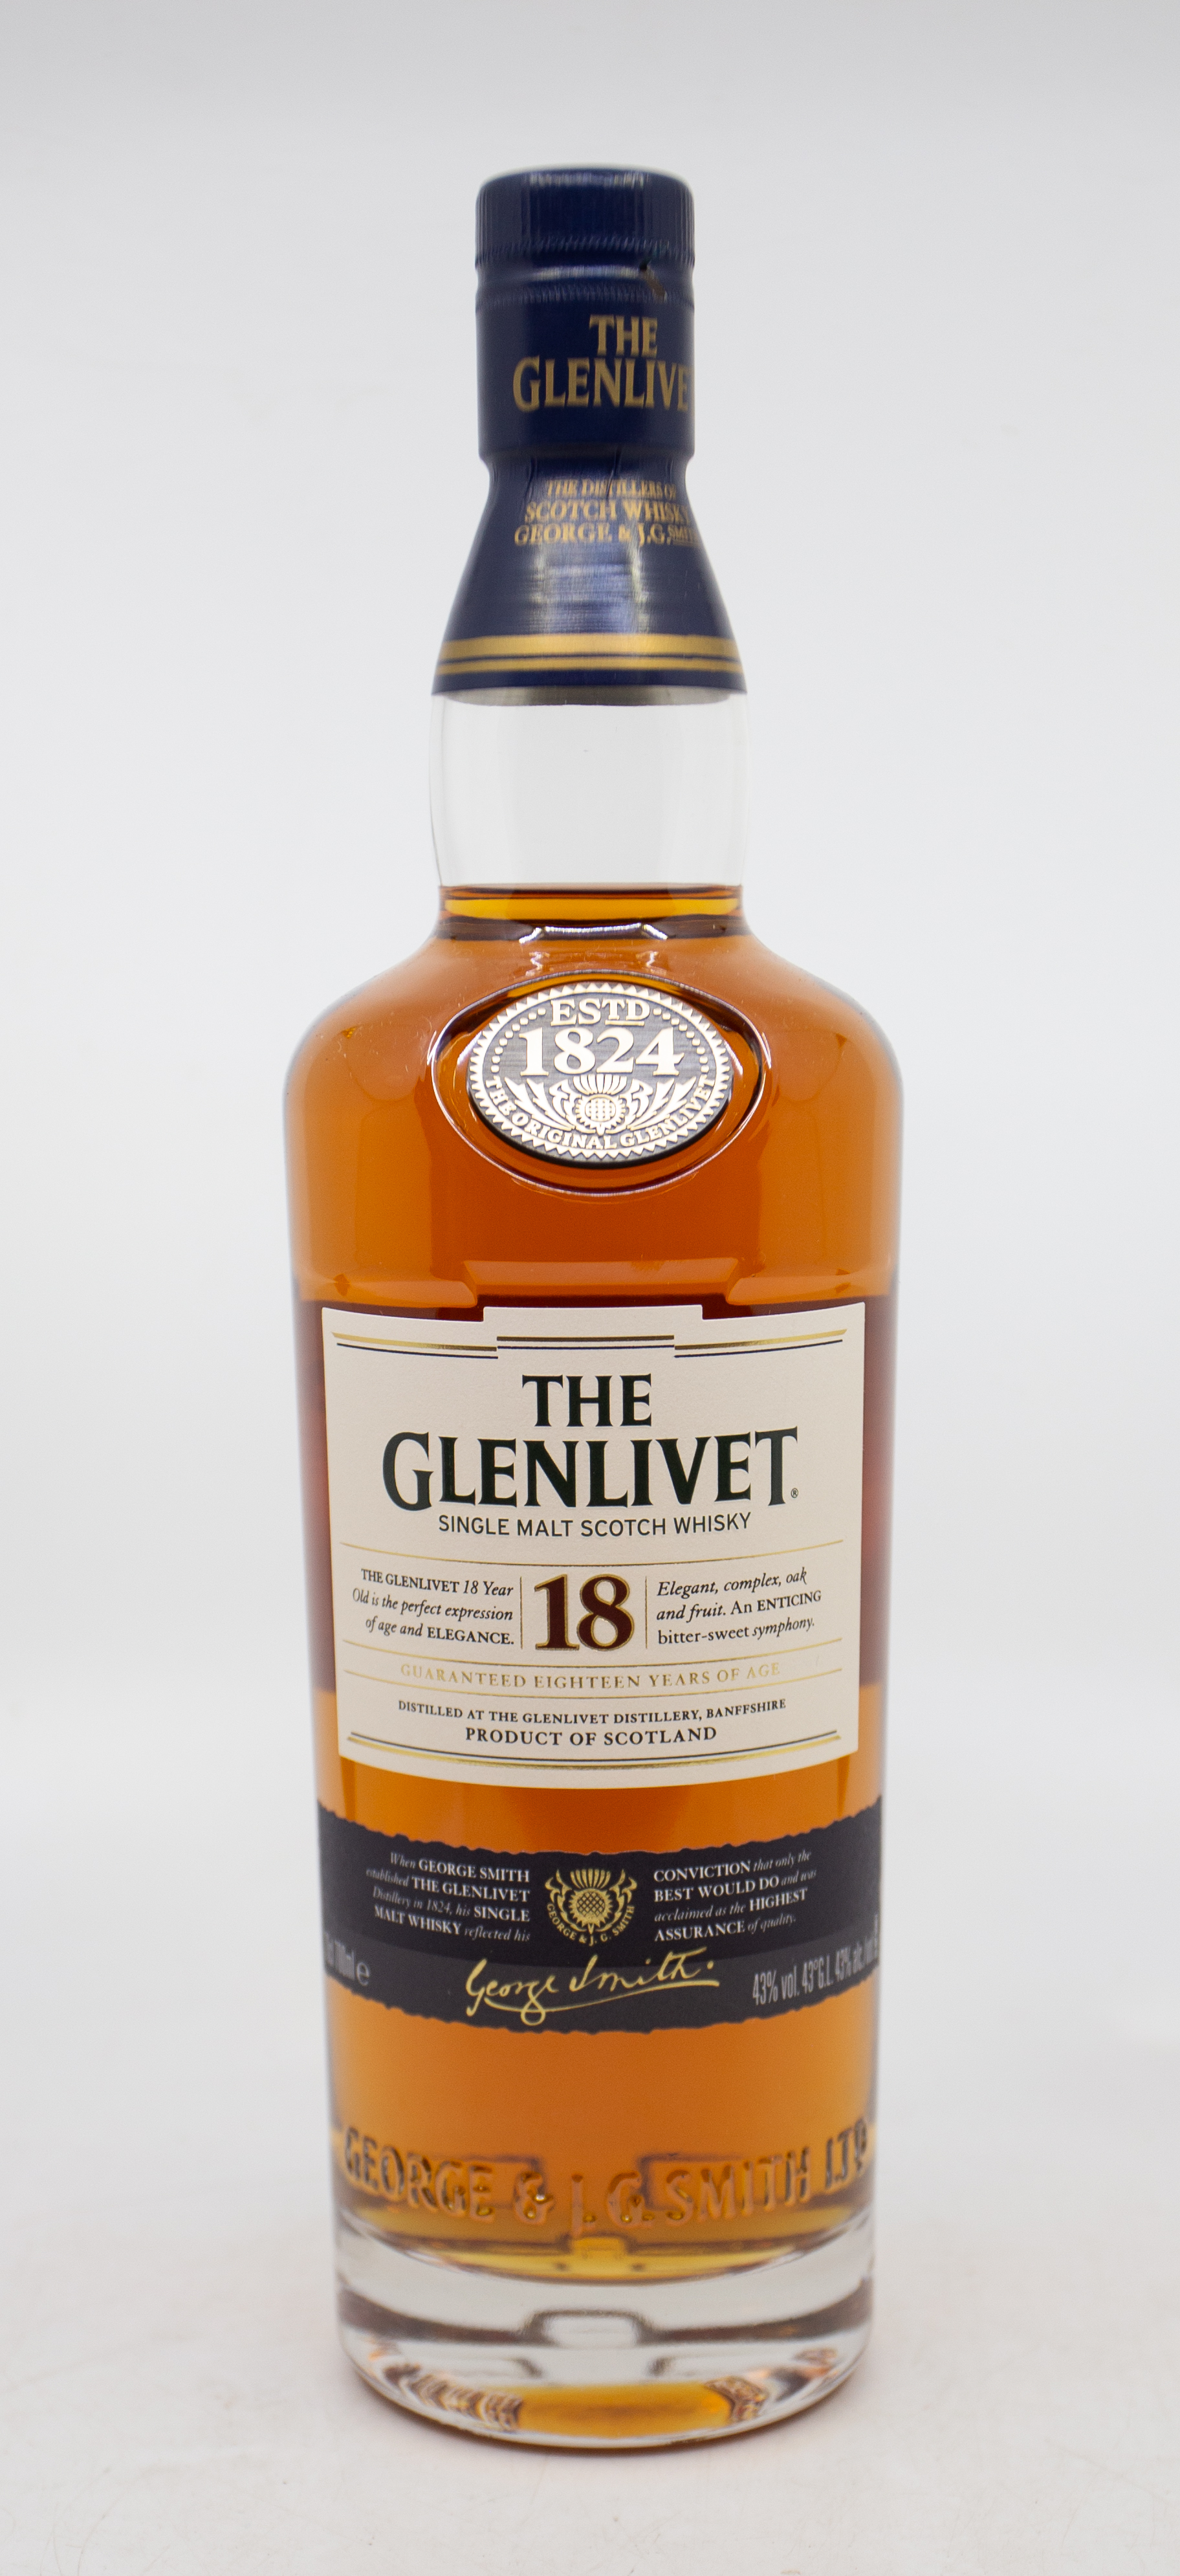 The Glenlivet, 18 years of age, single malt Scotch whisky, 70 cl, 43% alcohol, boxed (1) Box missing - Image 2 of 3